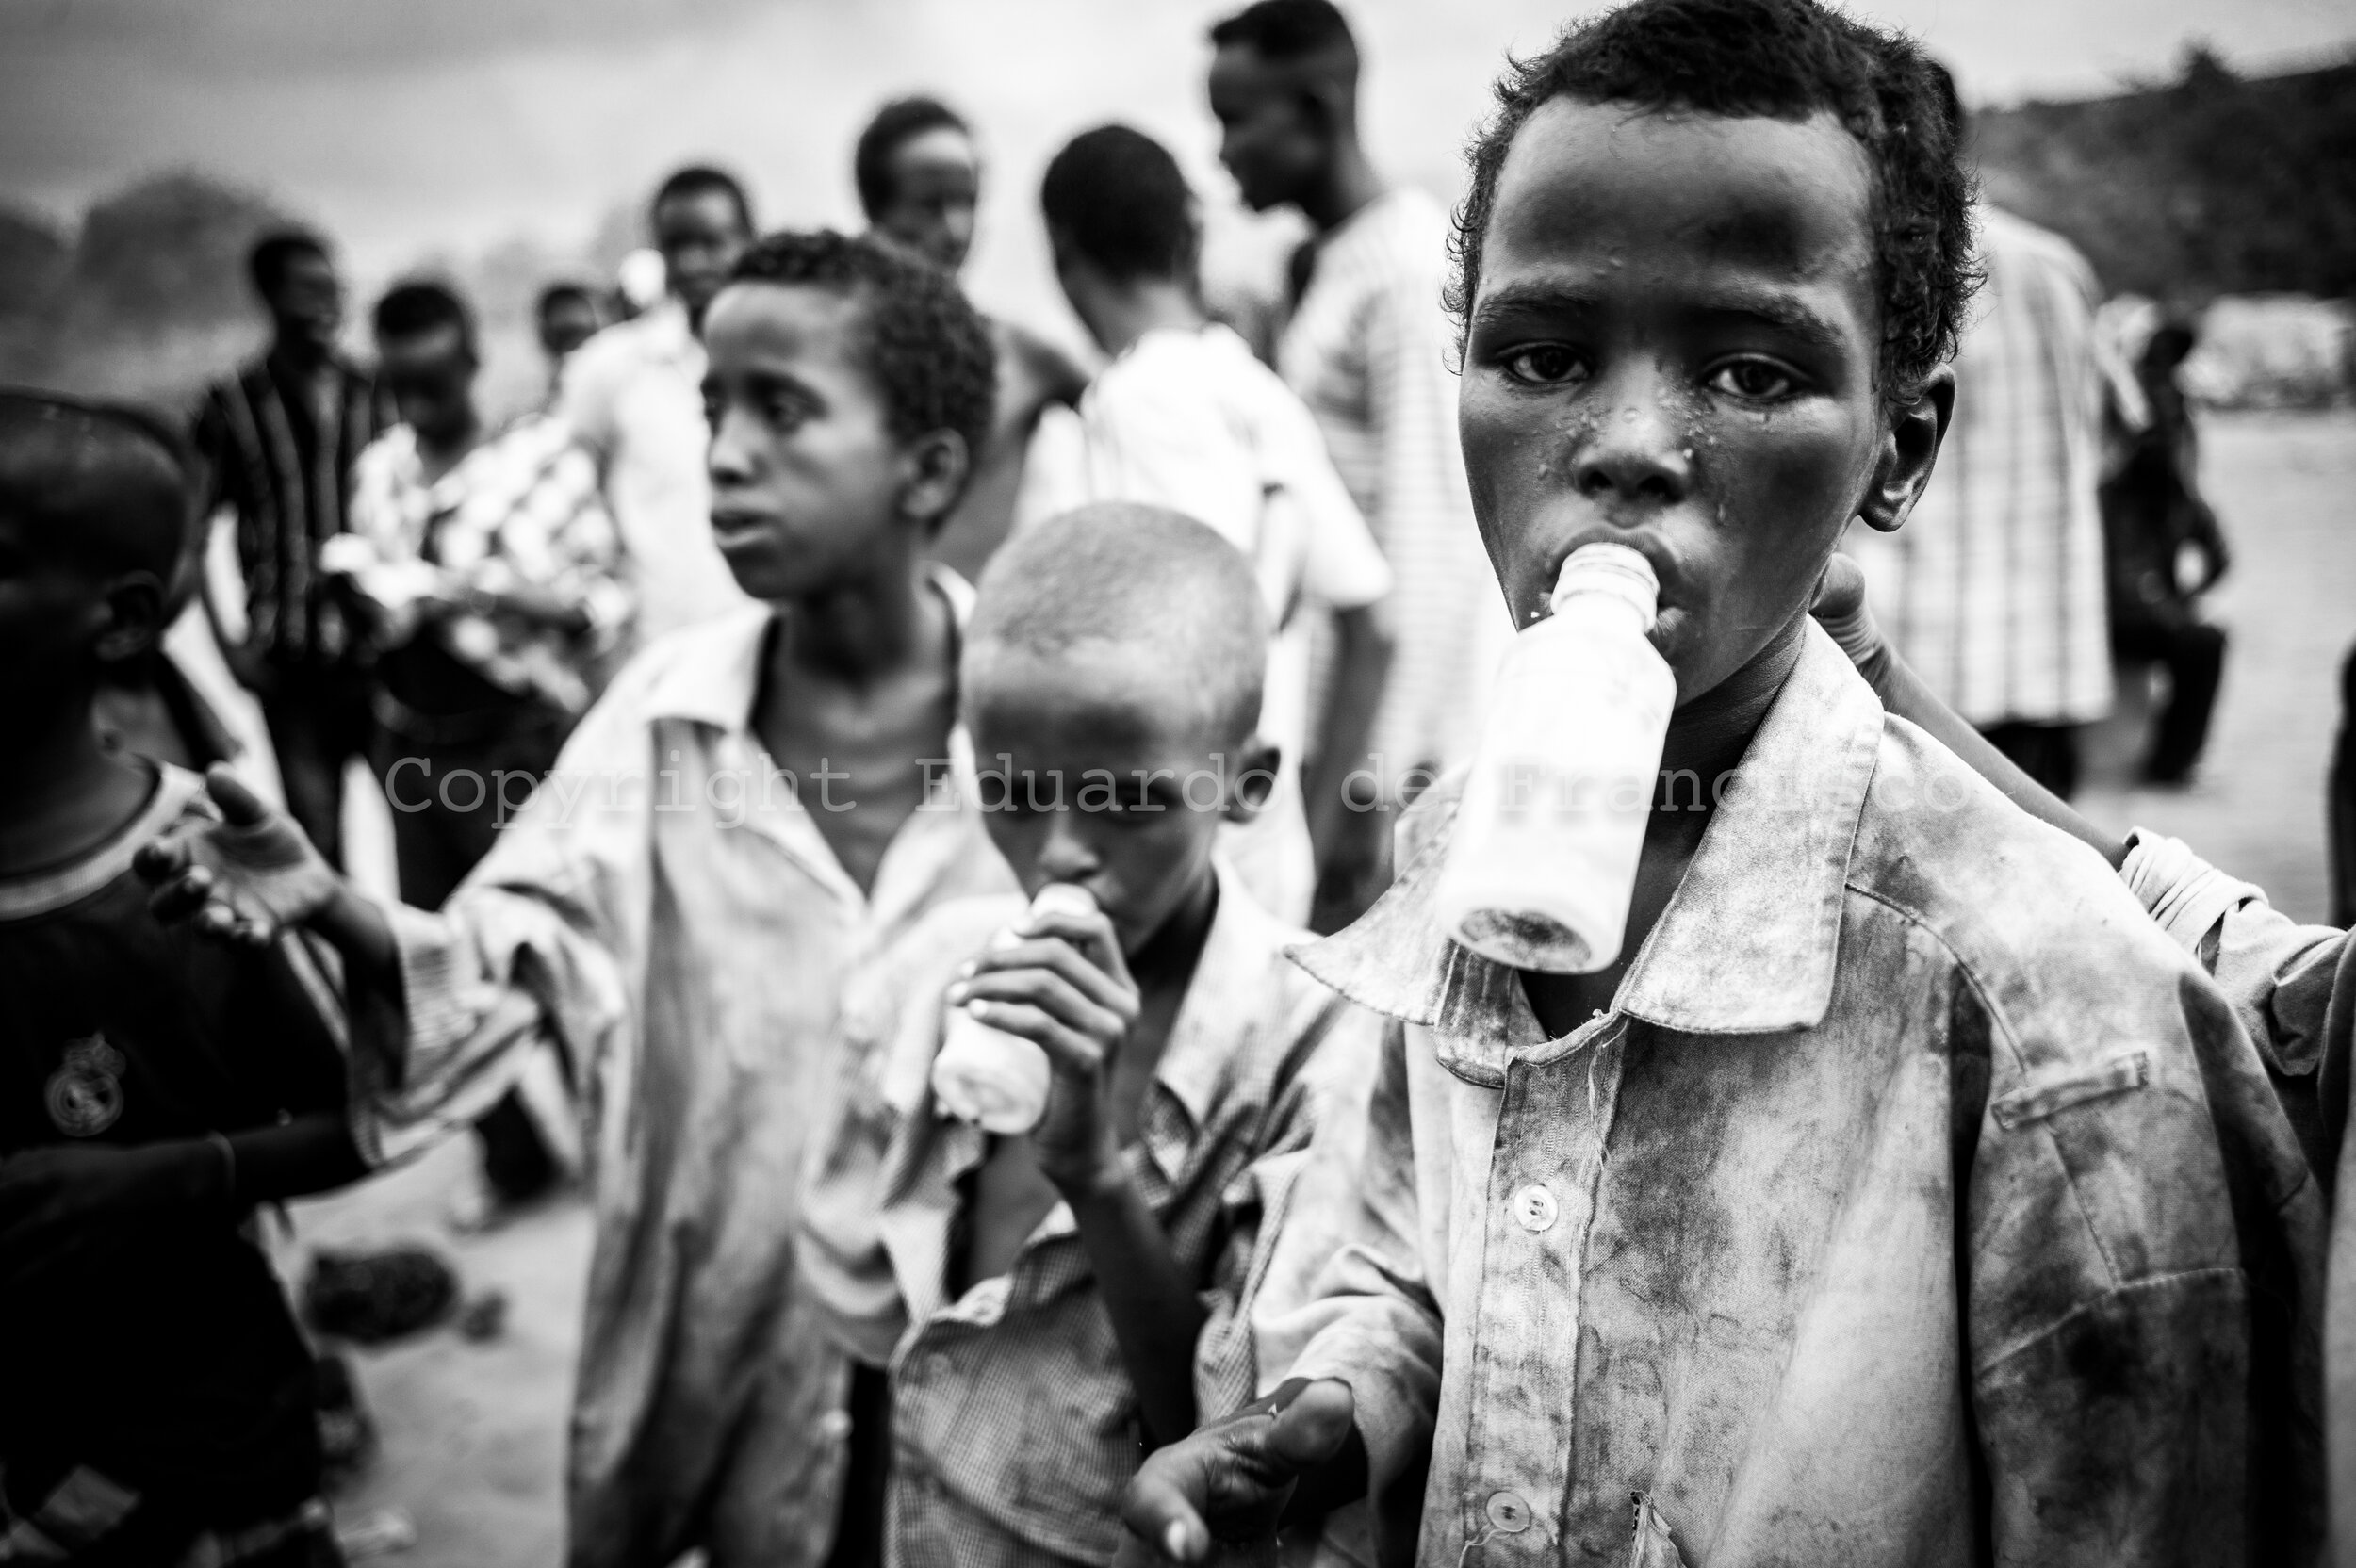  Street children in Mogadishu sniffing glue, bought to older children with the money that they get begging. To feed themselves, they scavenge in rubbish dumps. Heavy glue users like them can expect to suffer irreversible brain damage in two years. --